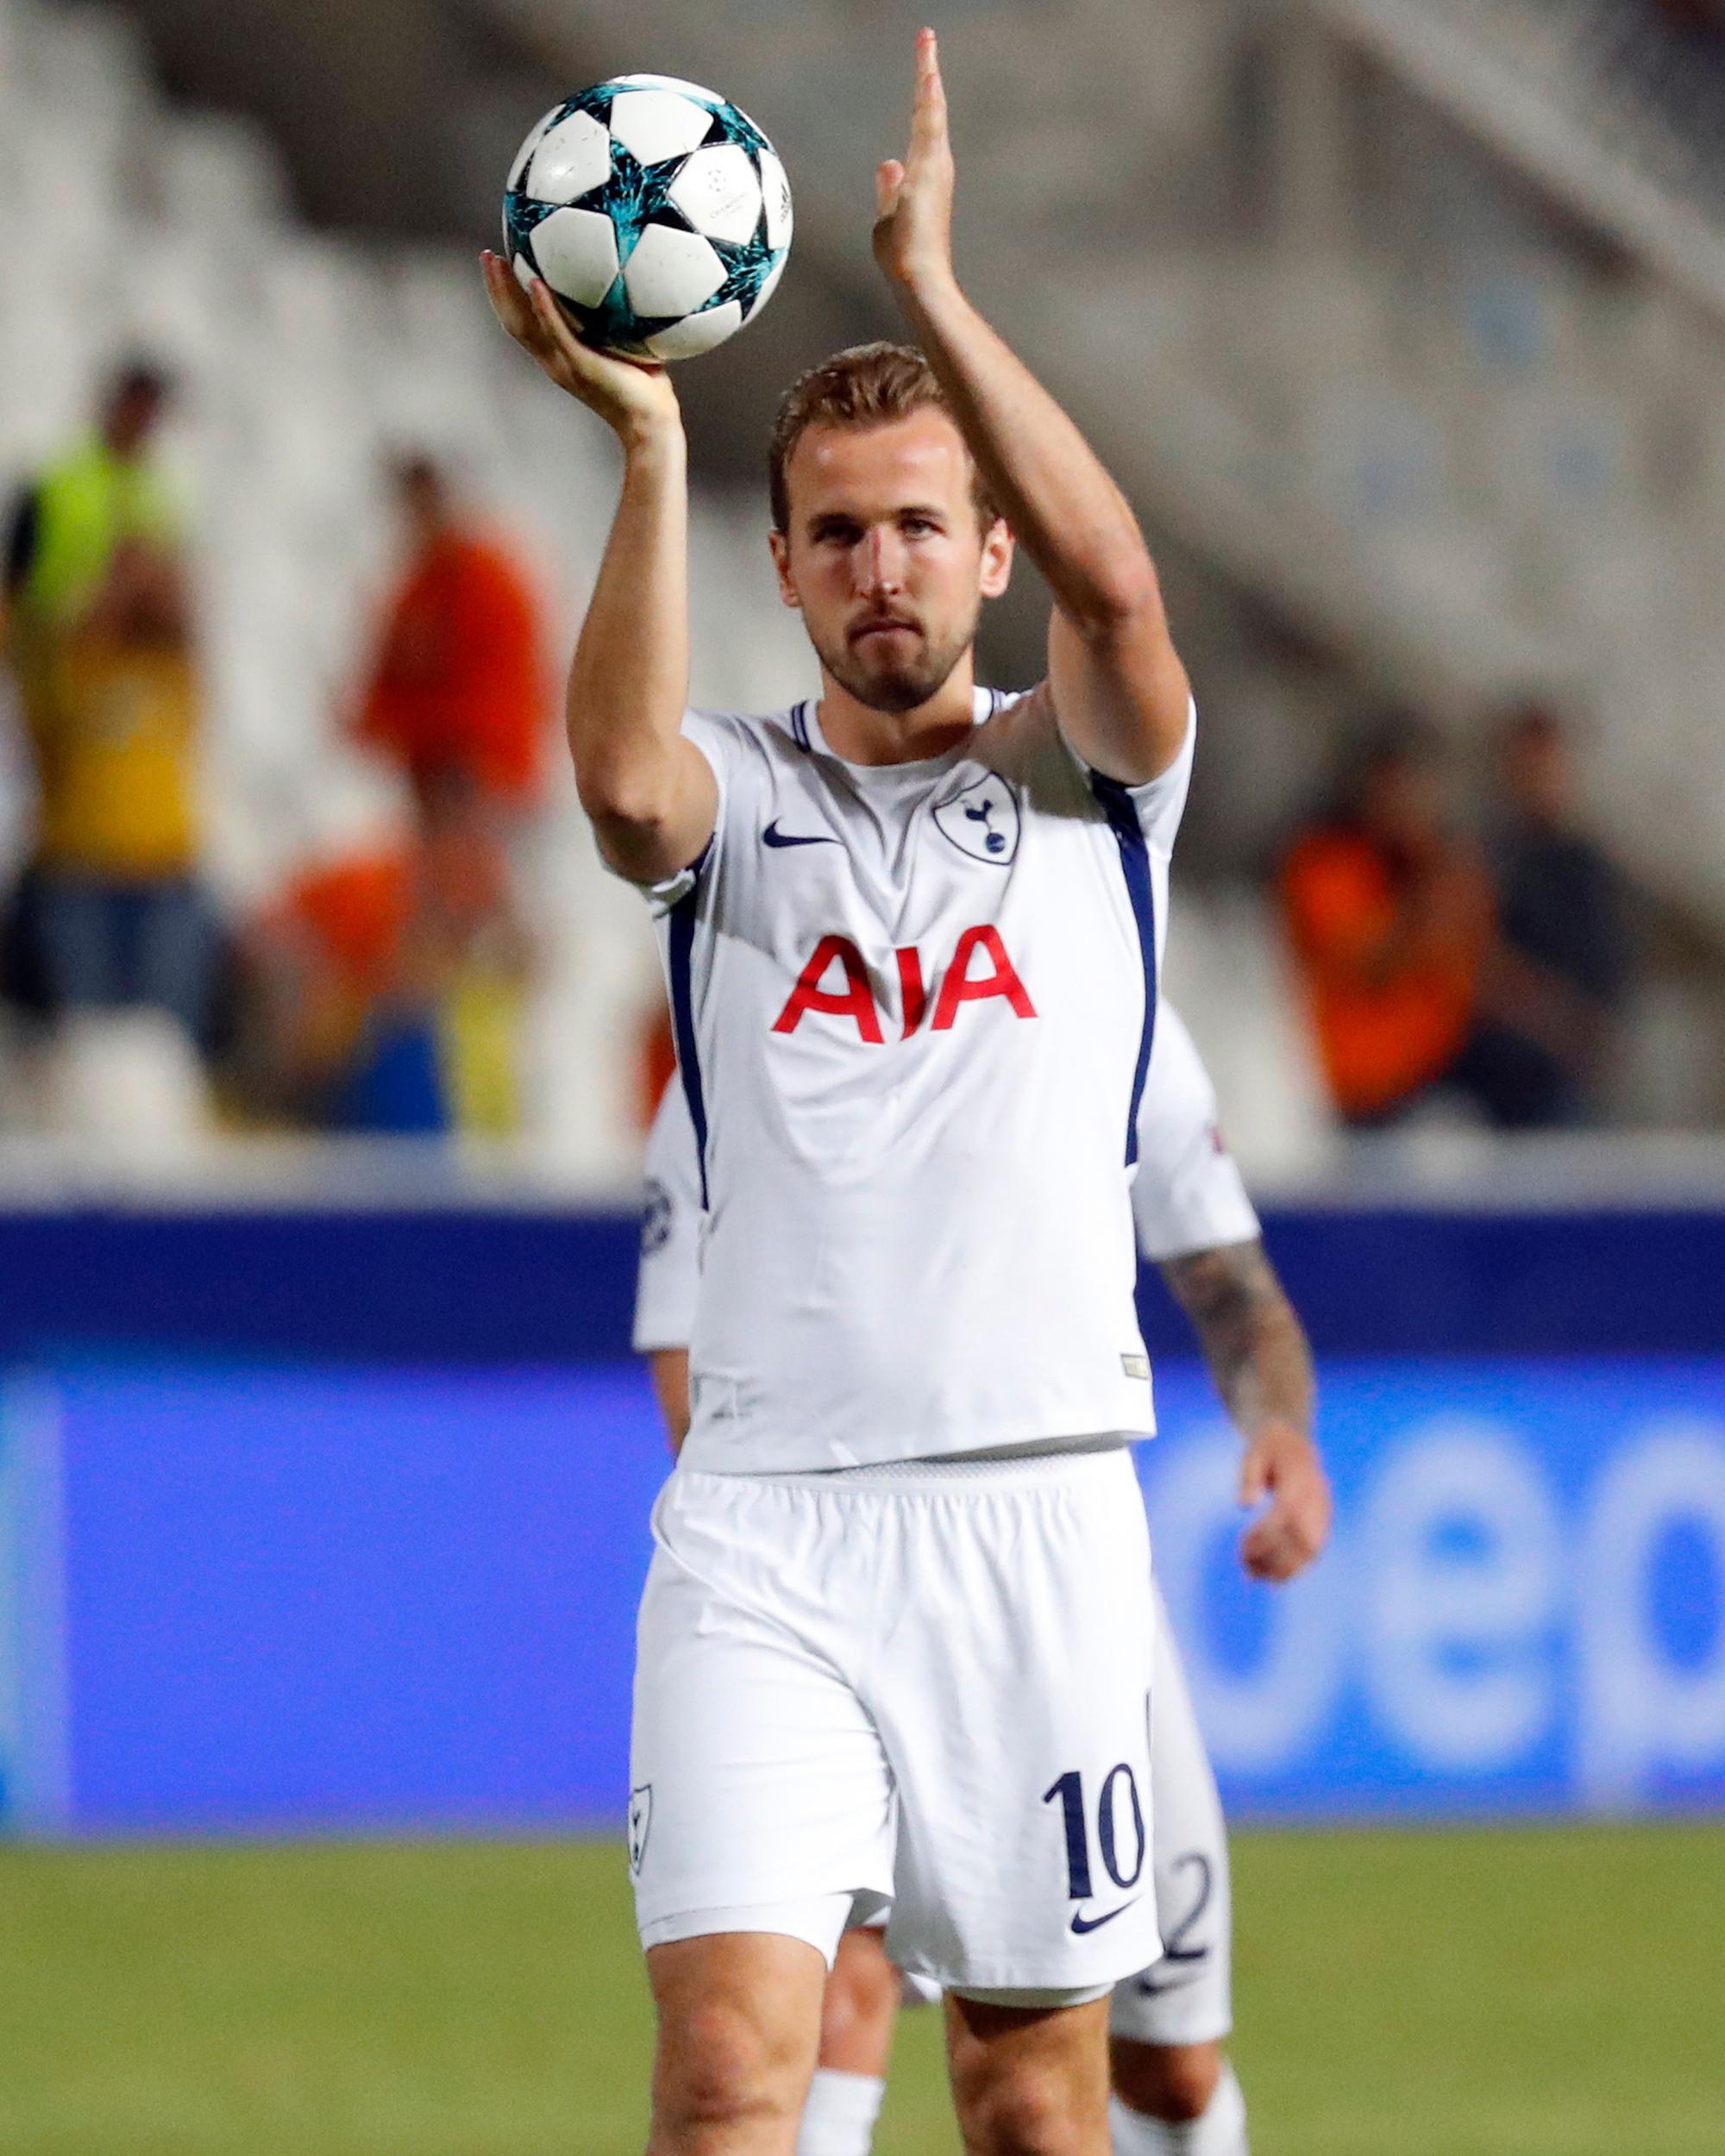 Kane now has five goals in two European games